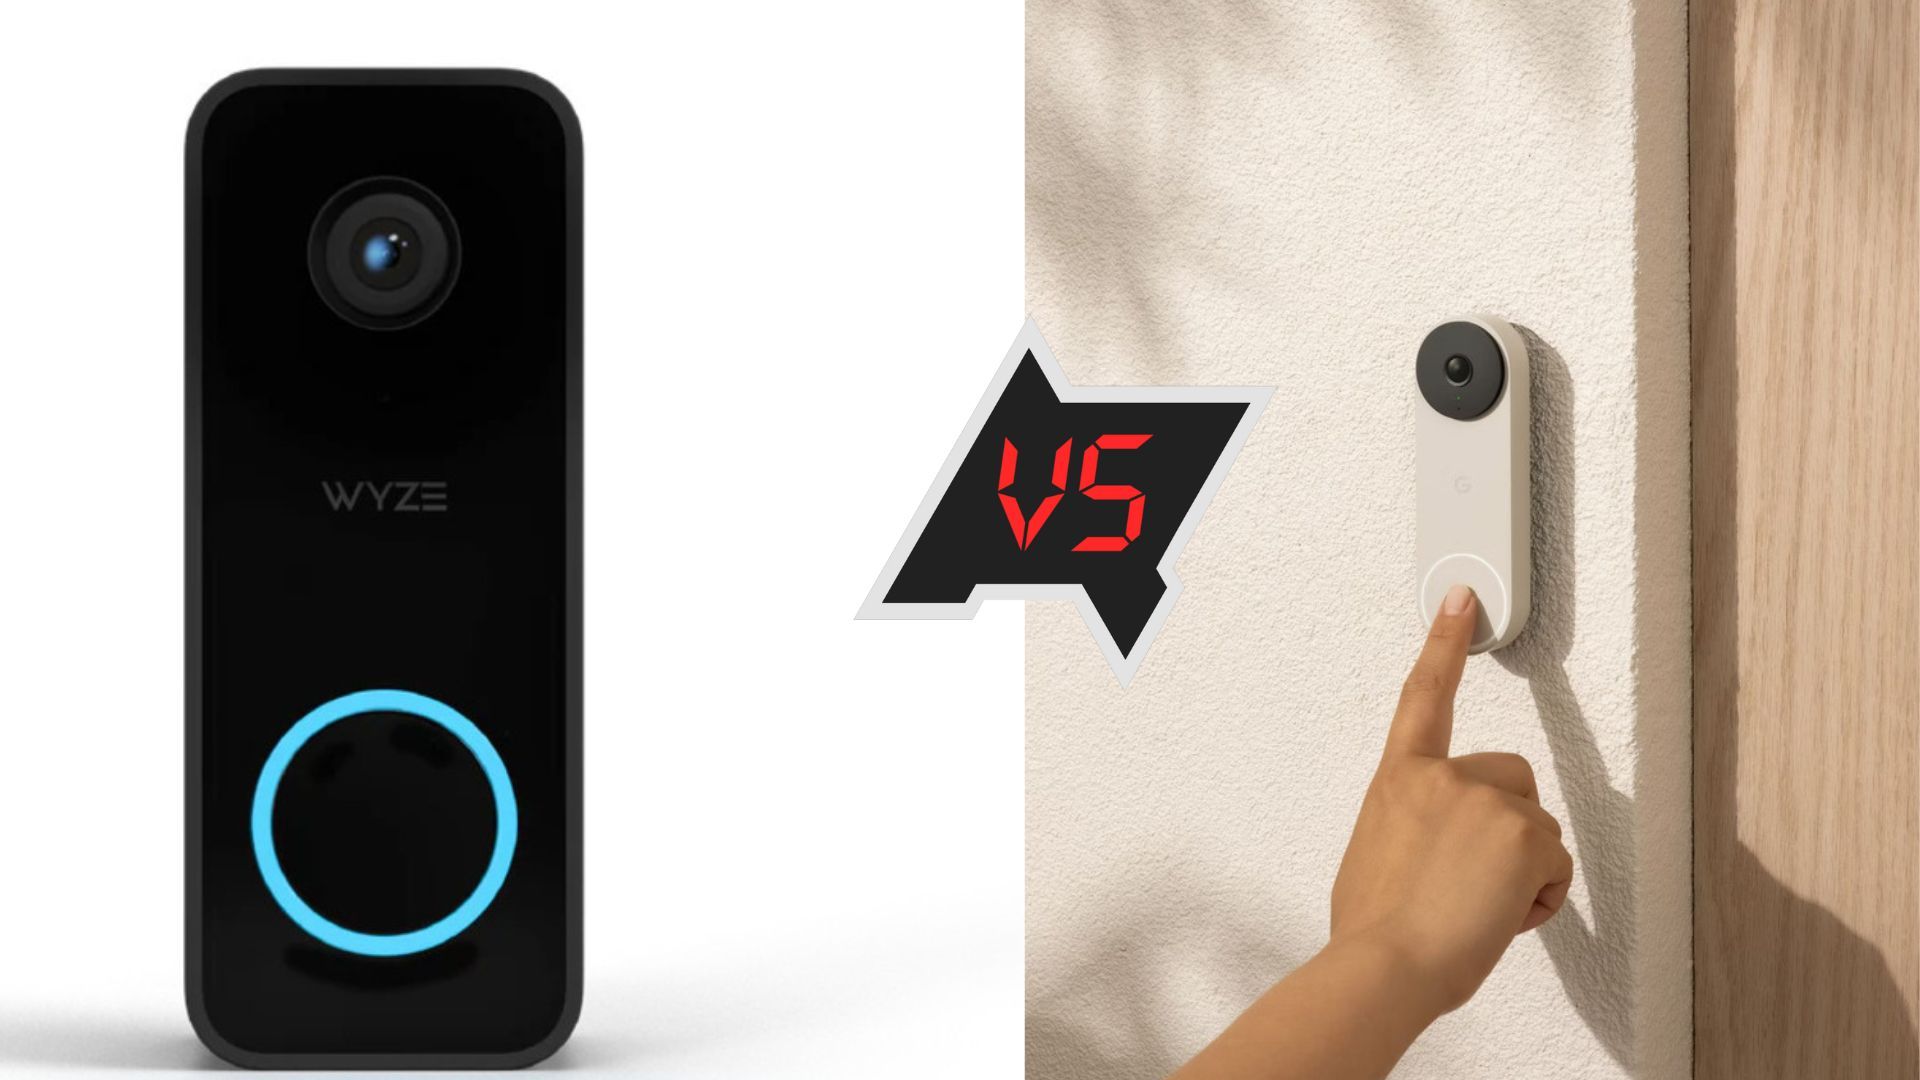 The Wyze Video Doorbell v2 and the Nest Doorbell (Wired, 2nd Gen) side by side